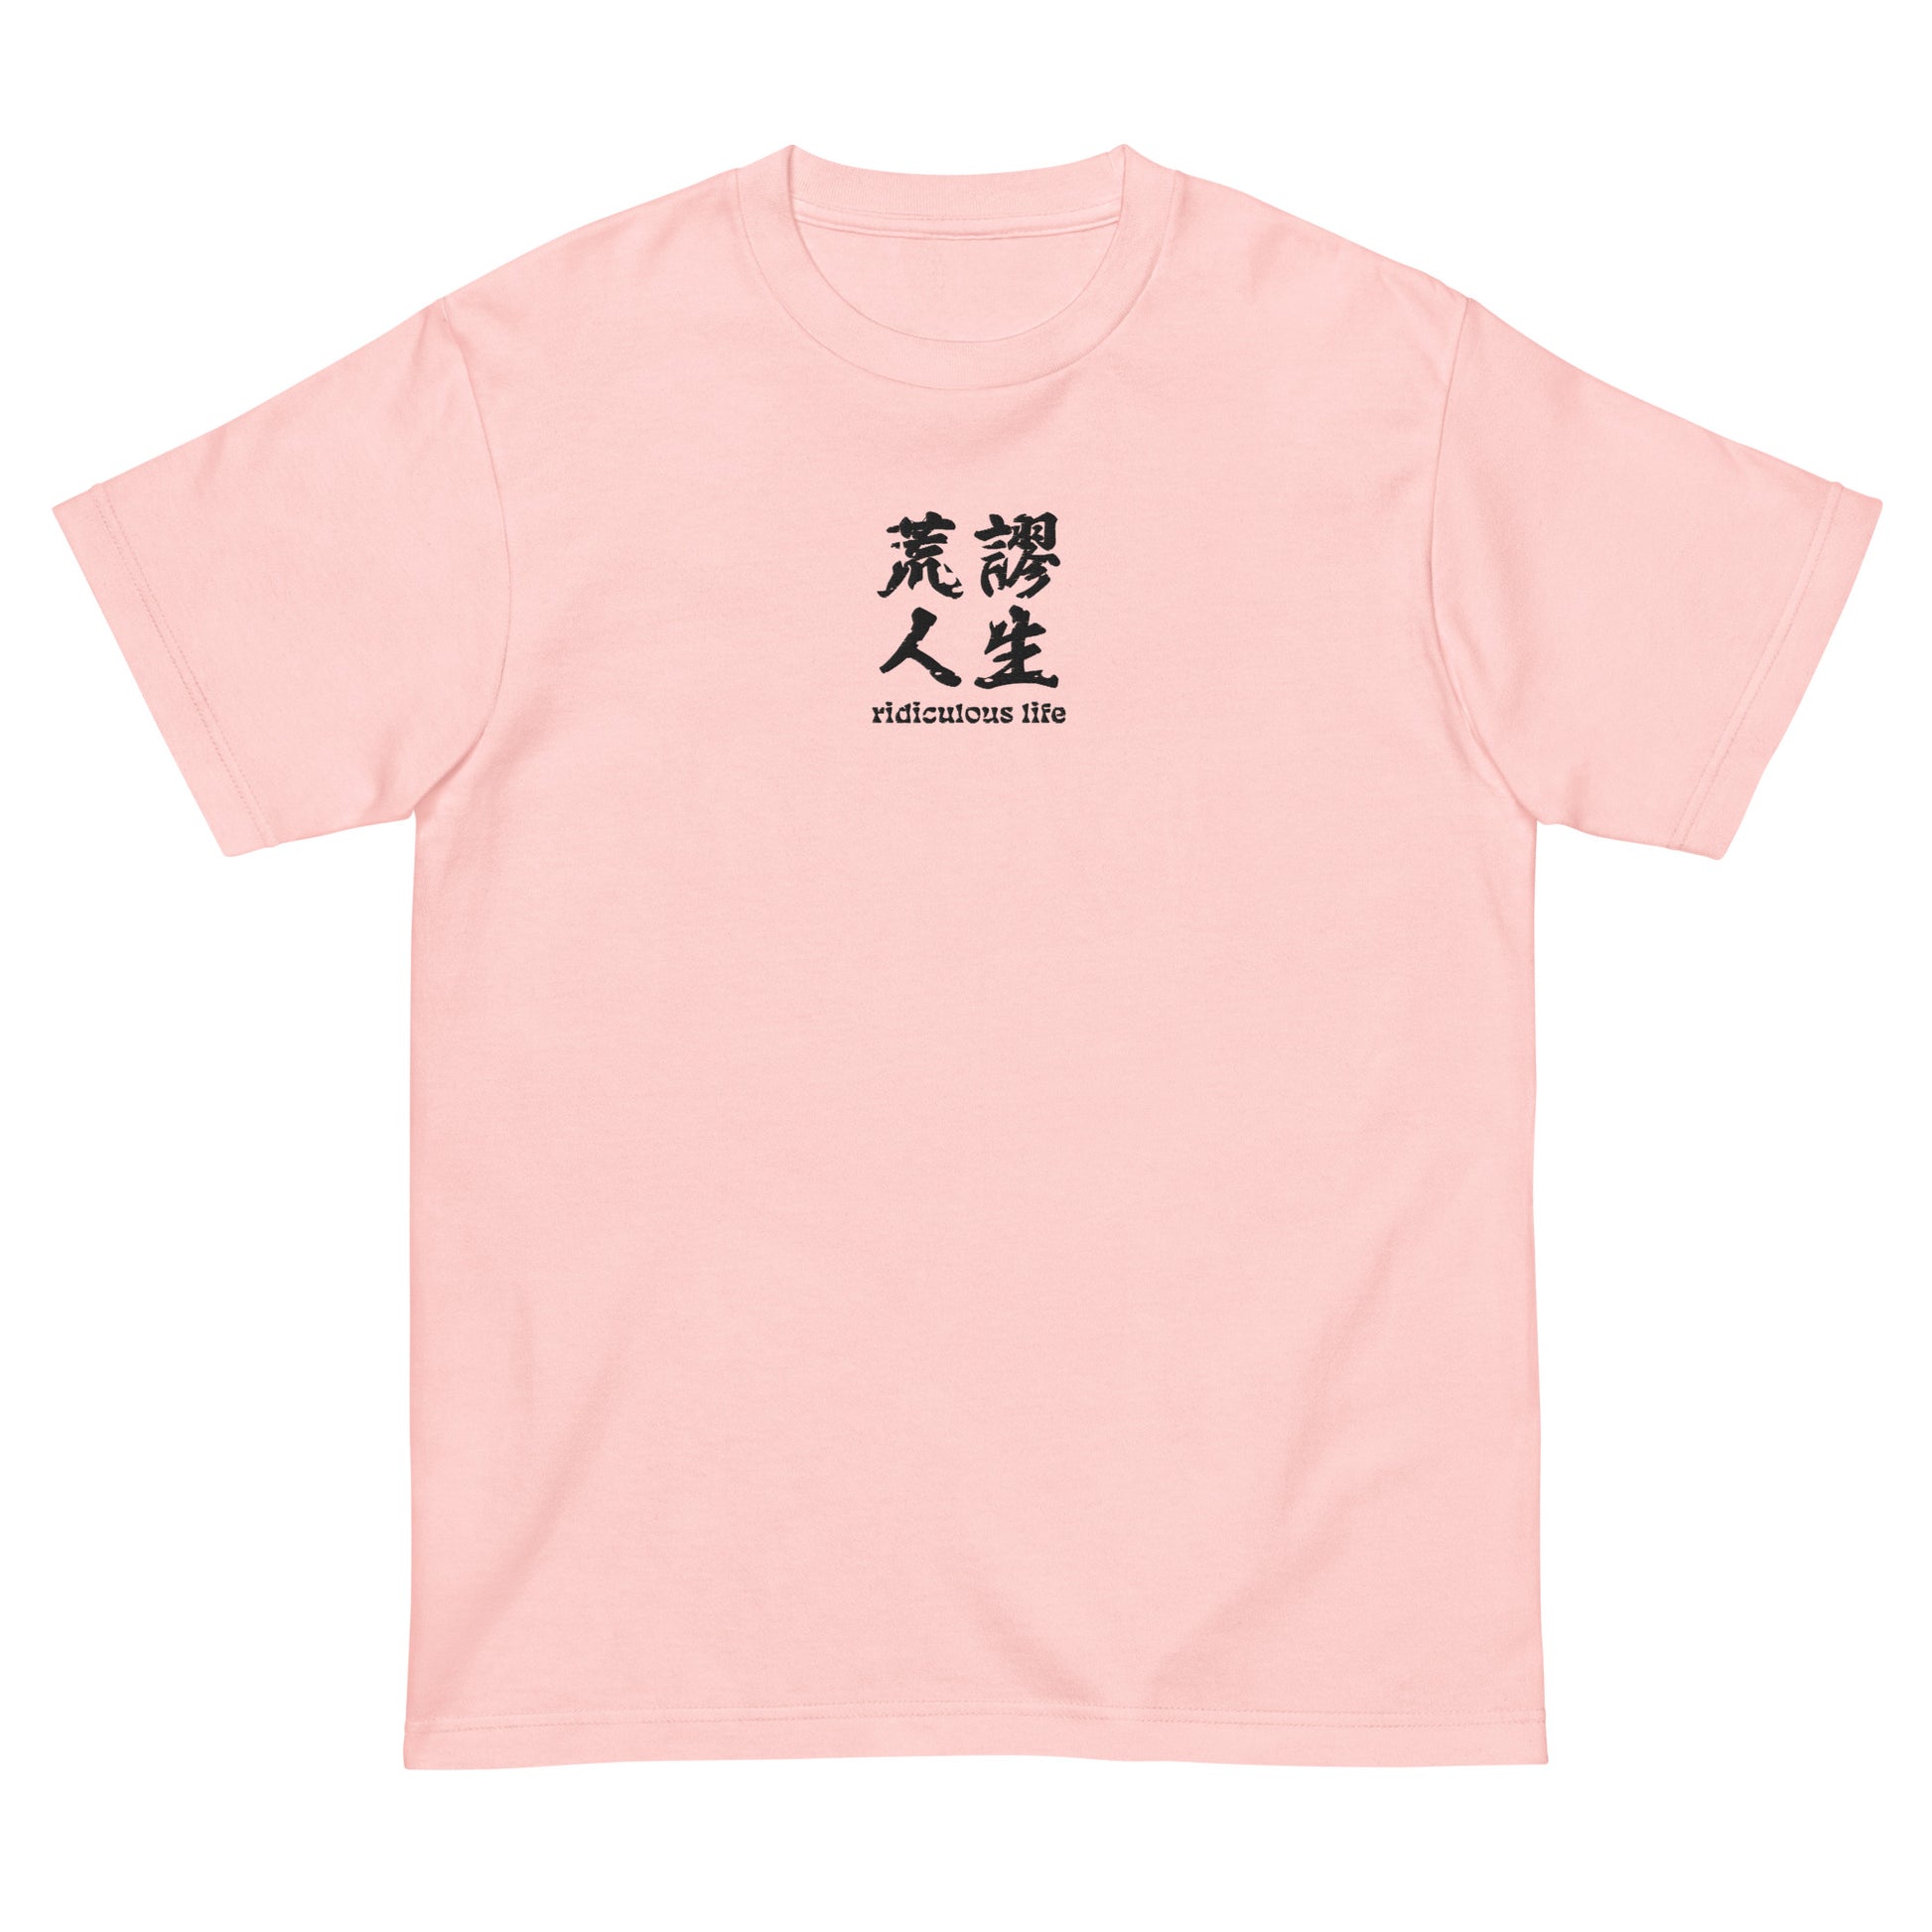 Pink High Quality Tee - Front Design with an Black Embroidery "Ridiculous Life" in Chinese and English